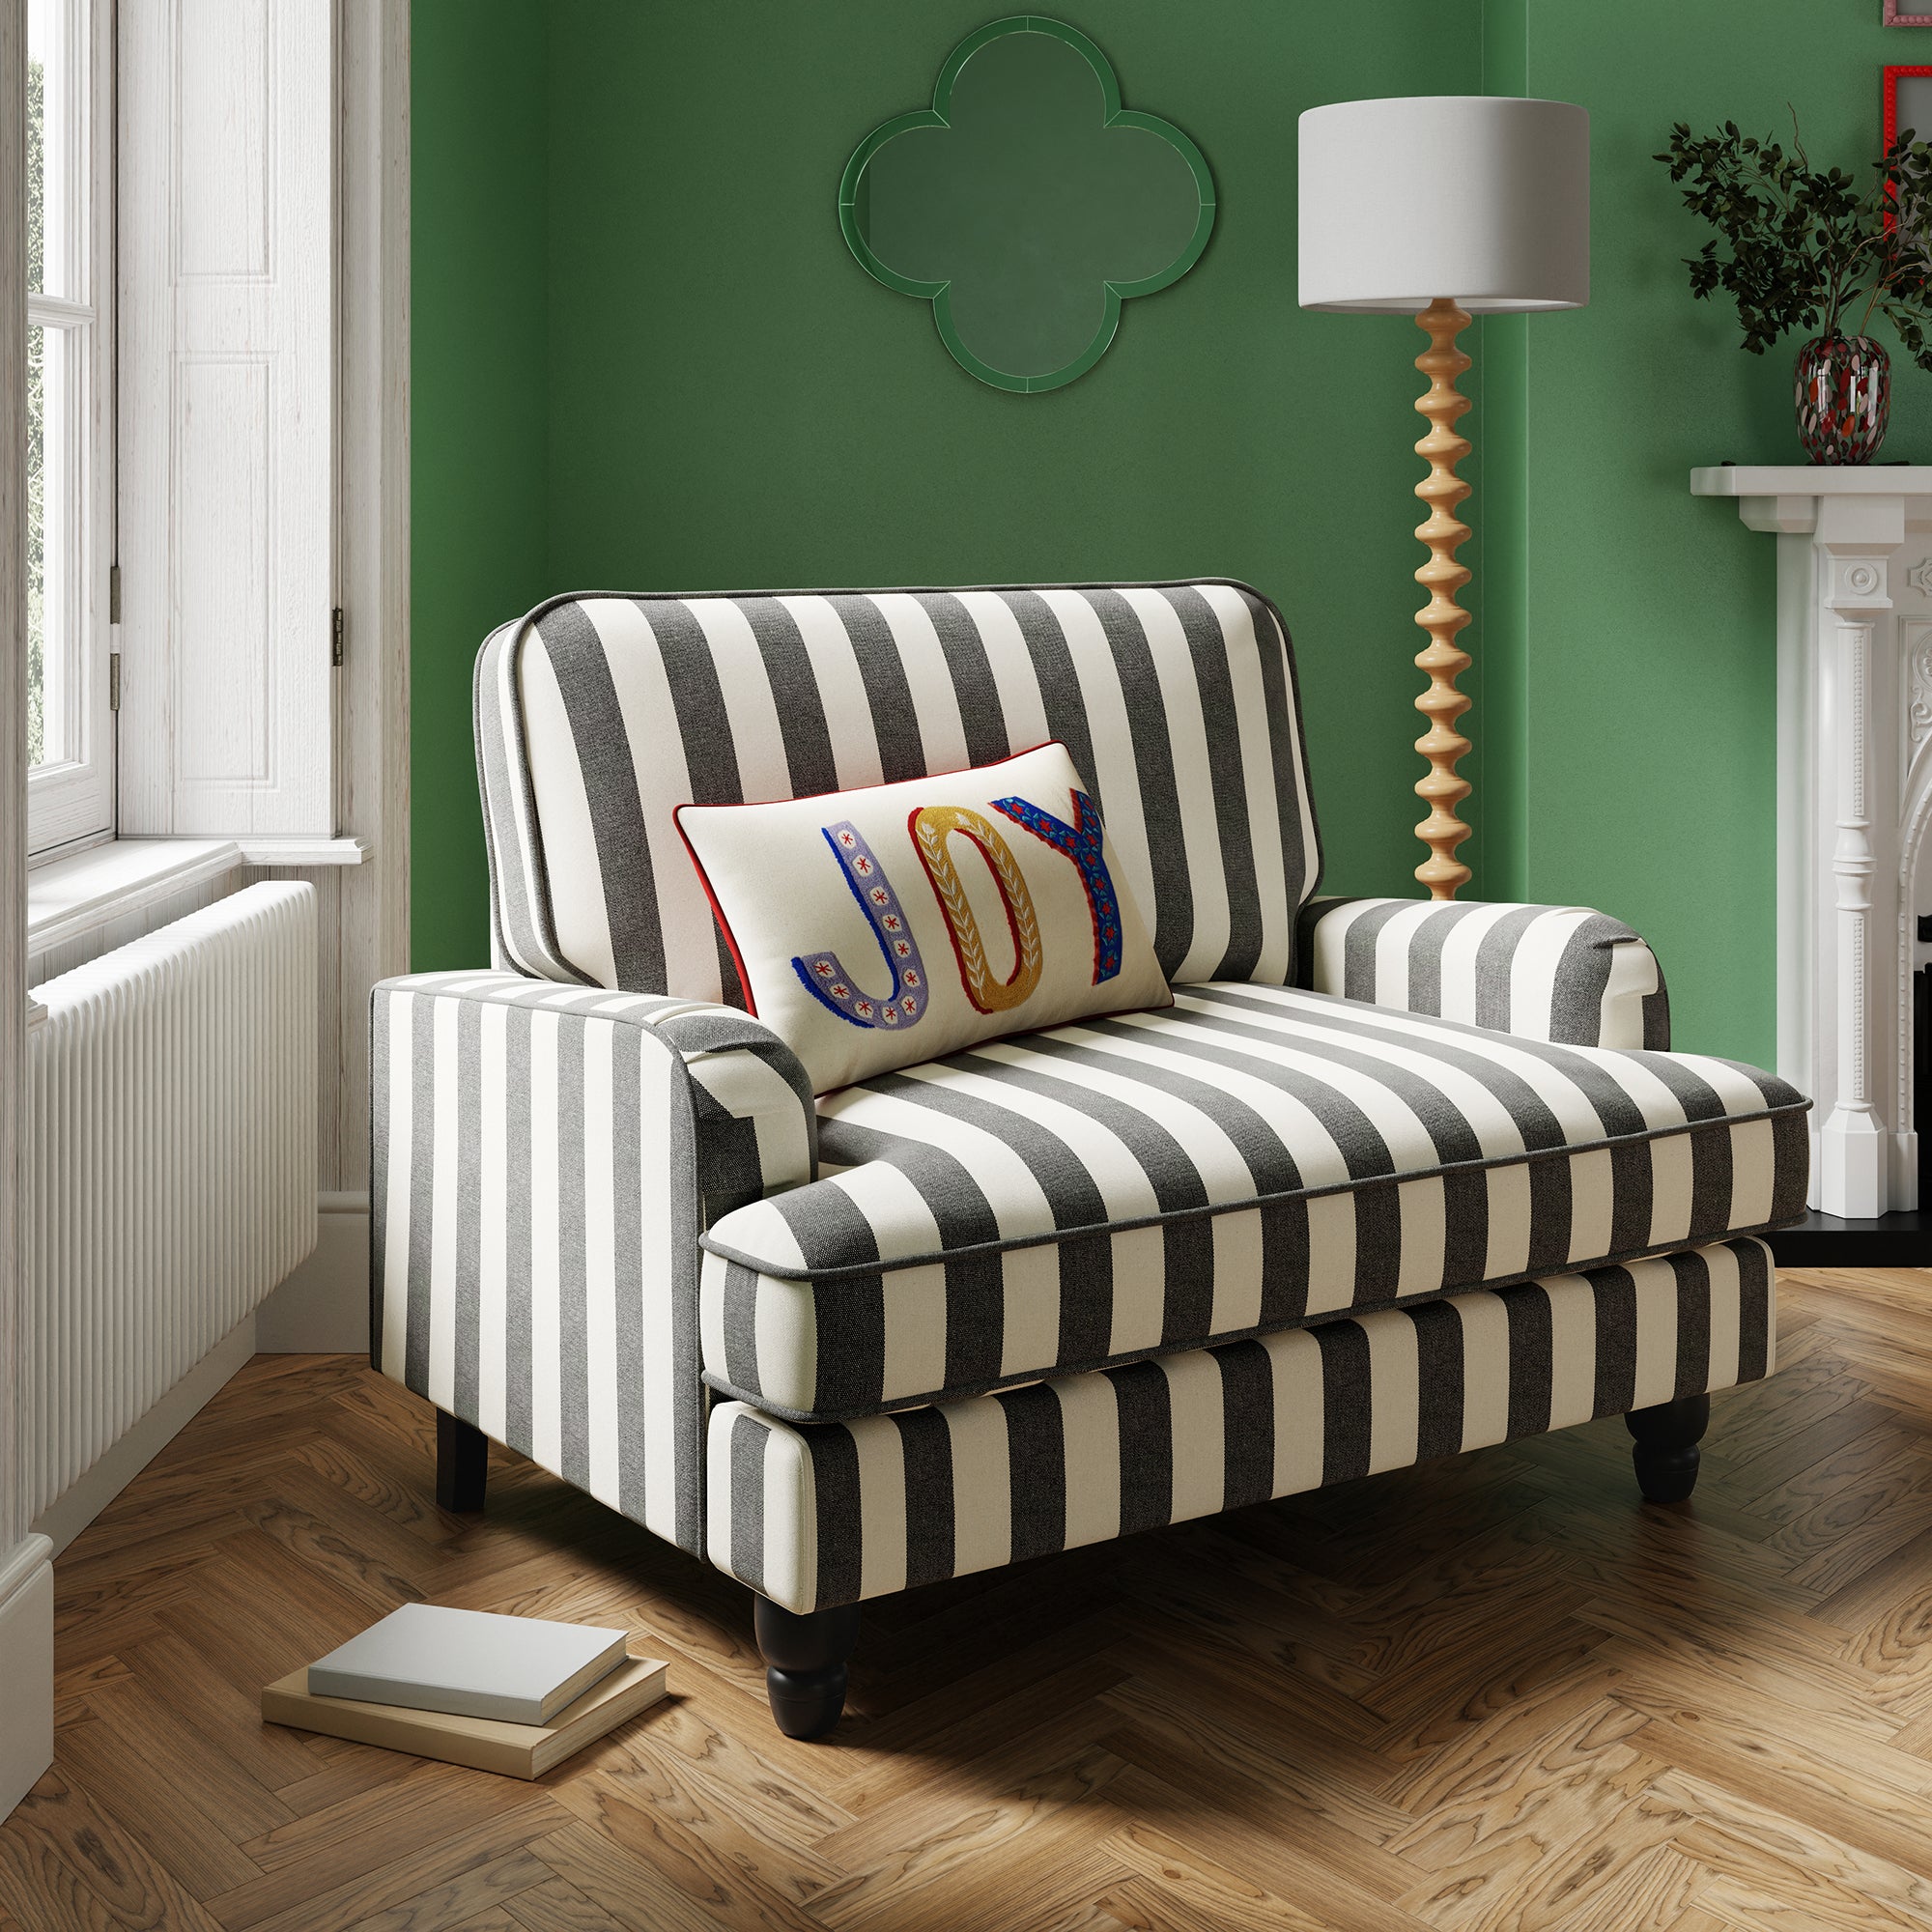 Beatrice Woven Striped Snuggle Chair Black